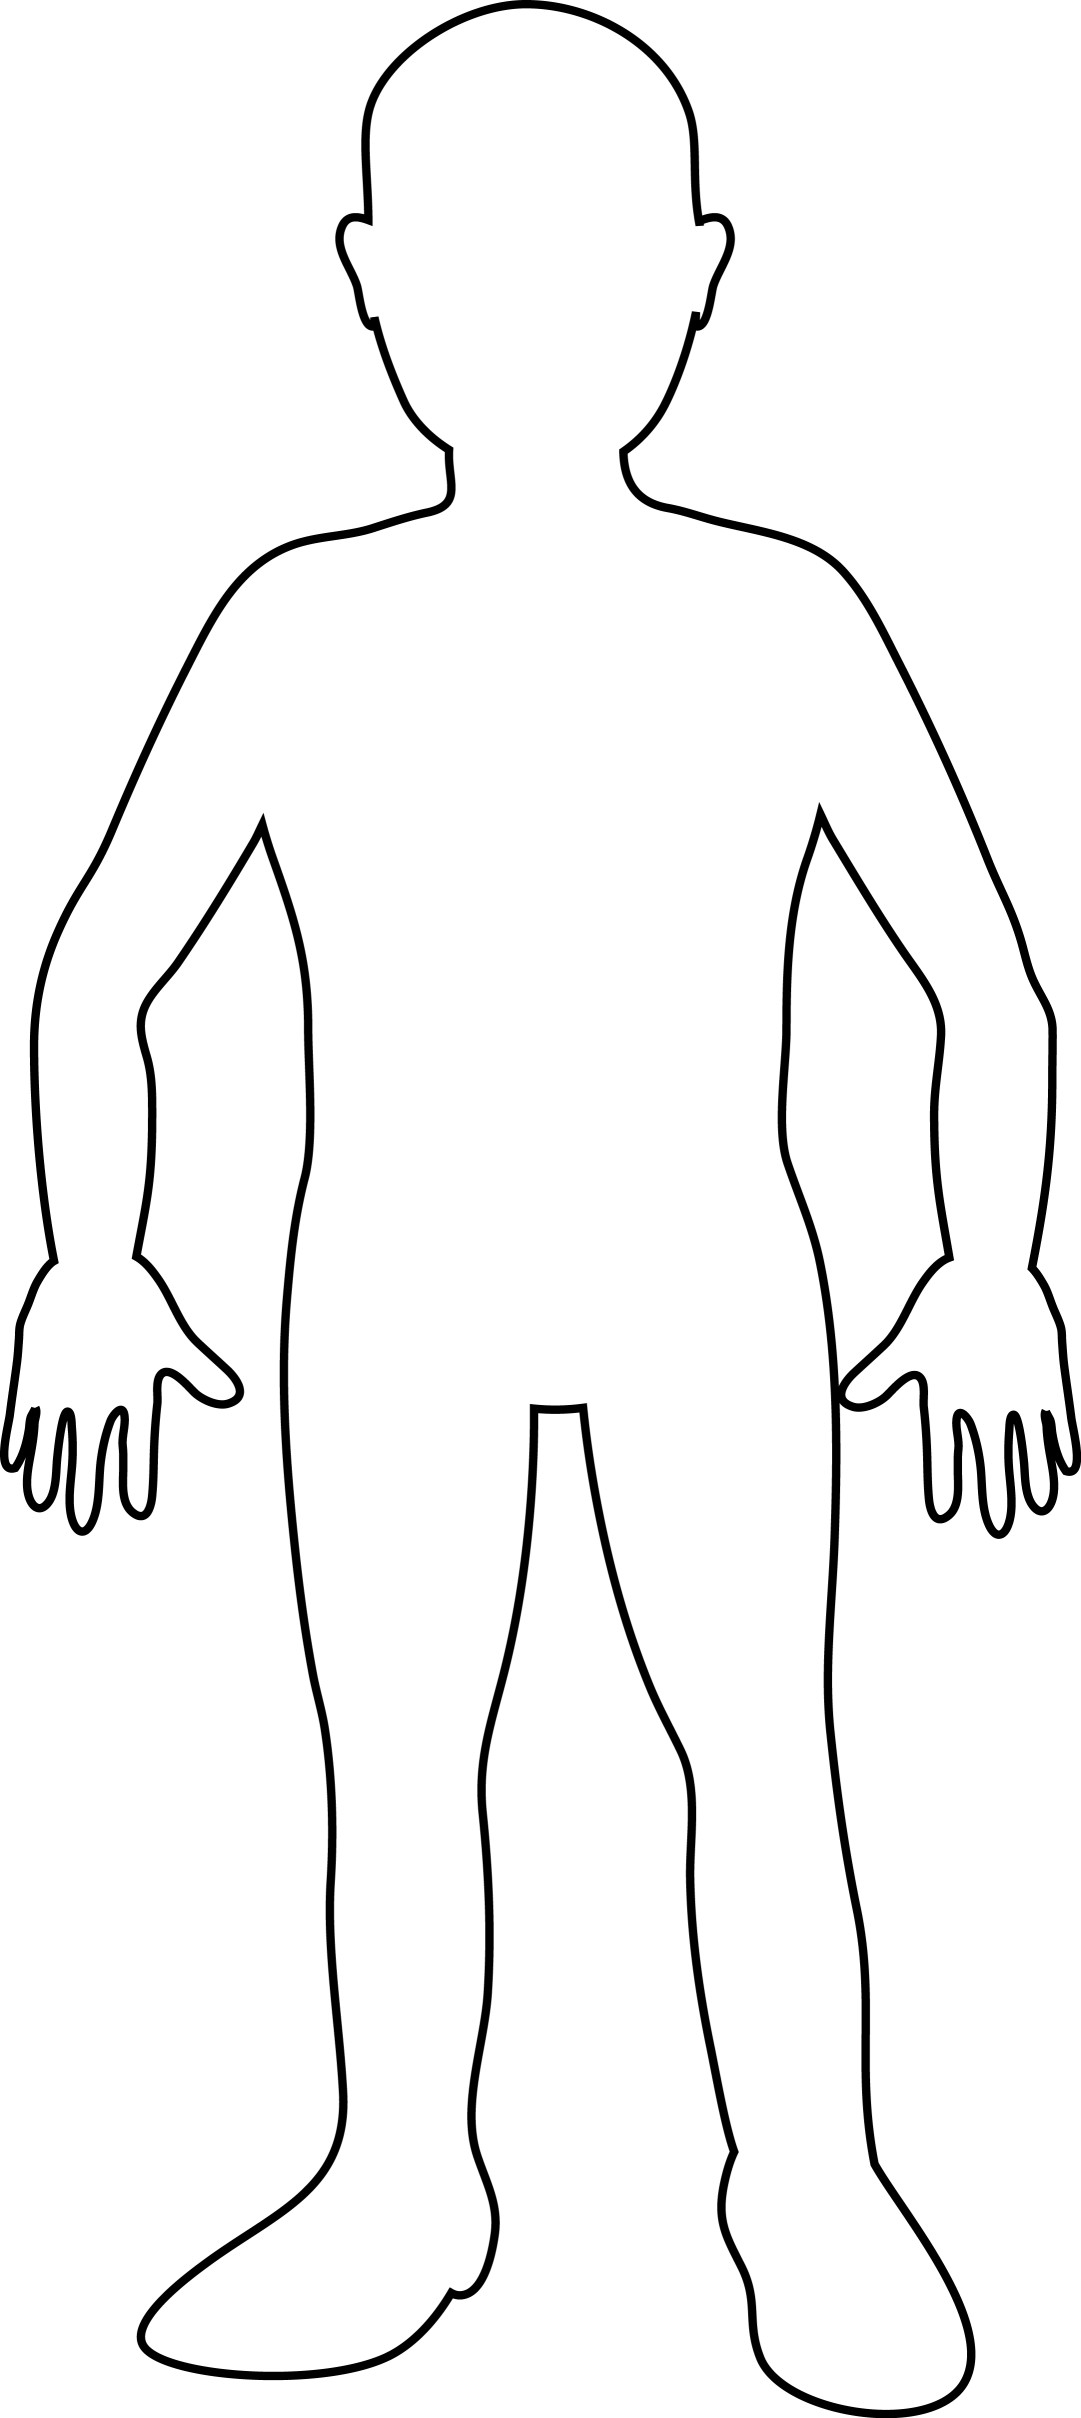 Free Person Outline Coloring Page, Download Free Person Outline